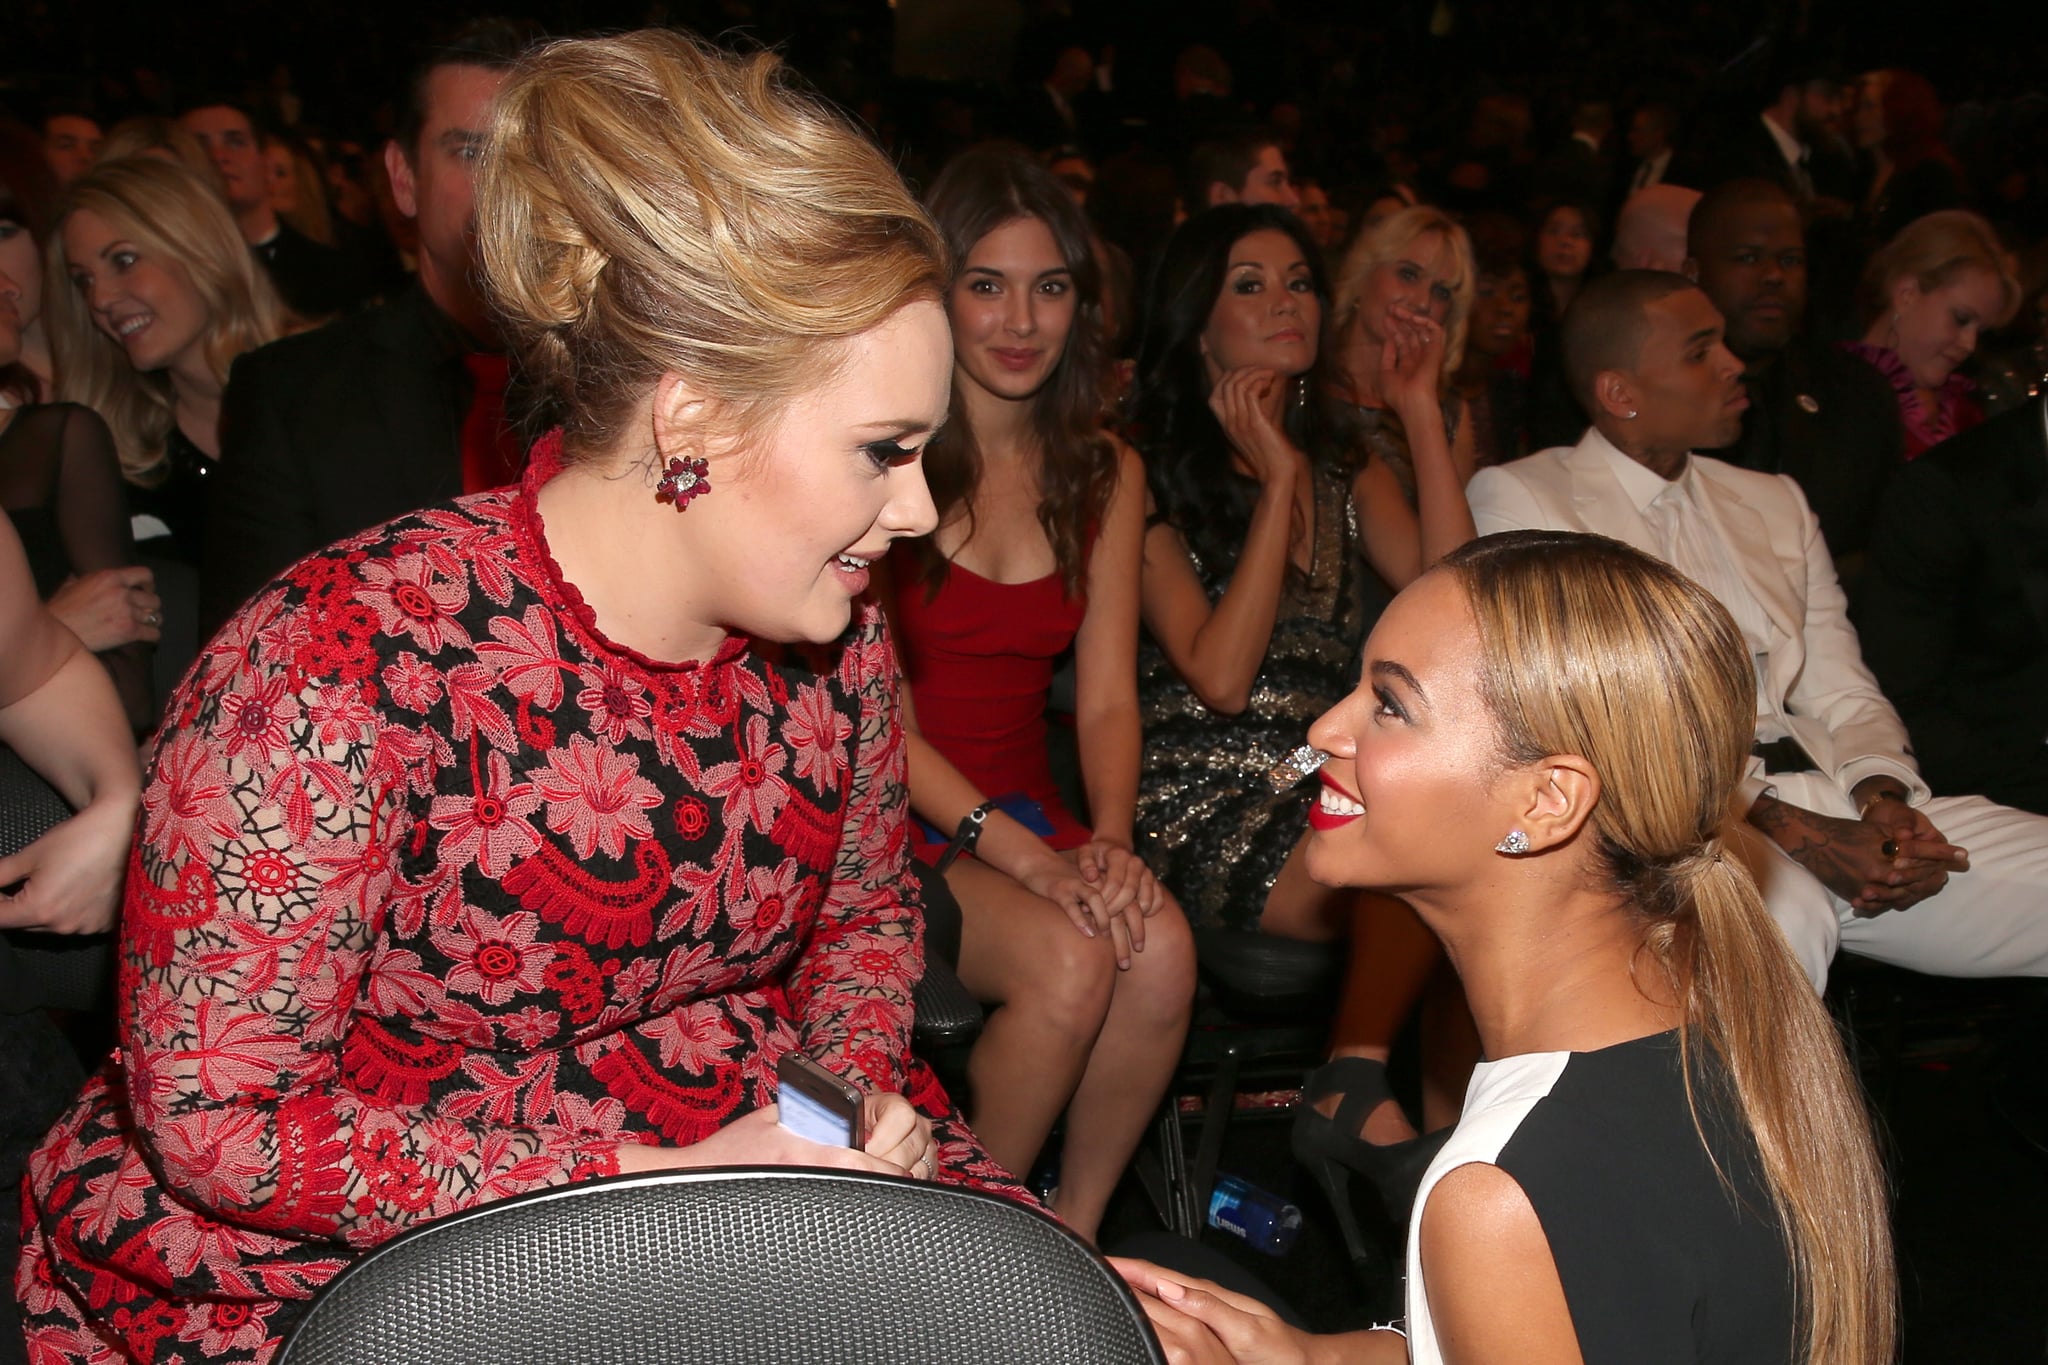 Beyoncé took a knee to chat with Adele during the 2013 Grammys.